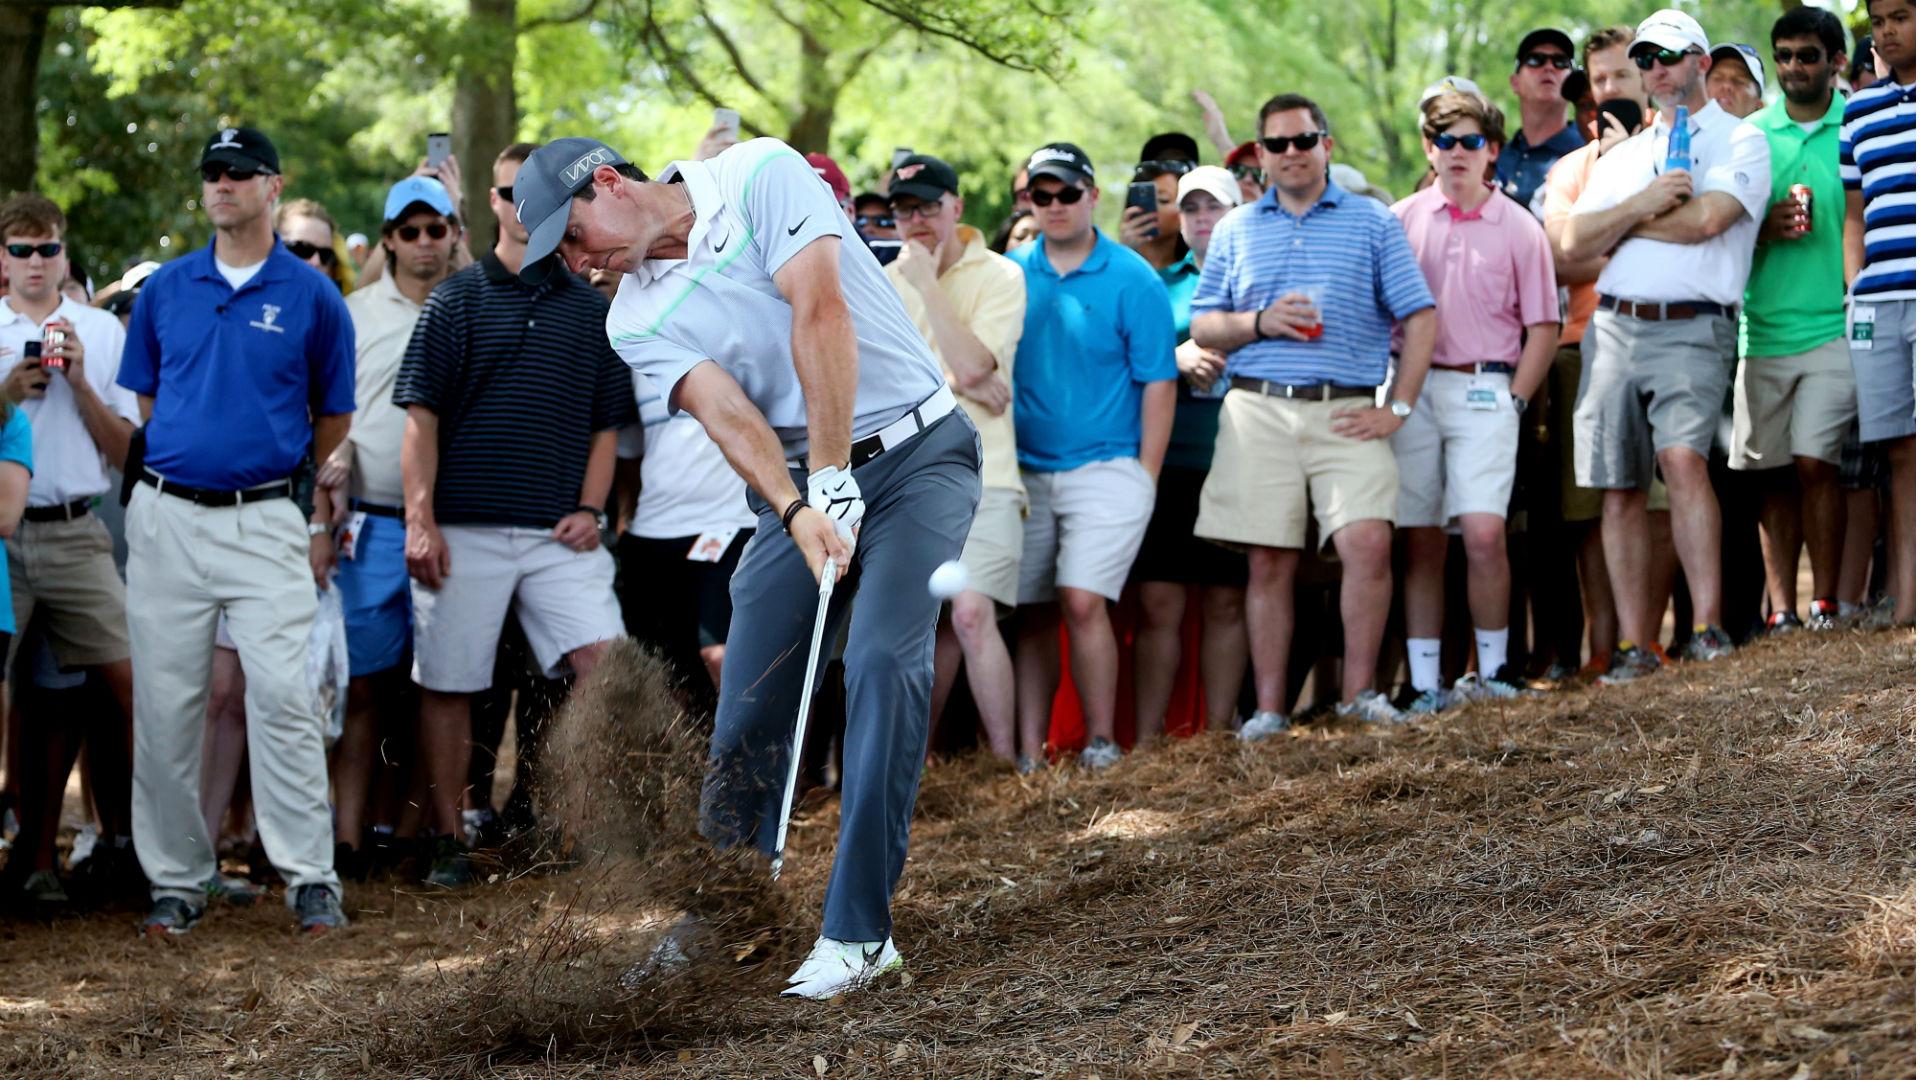 Wells Fargo Championship shows golf getting younger inside